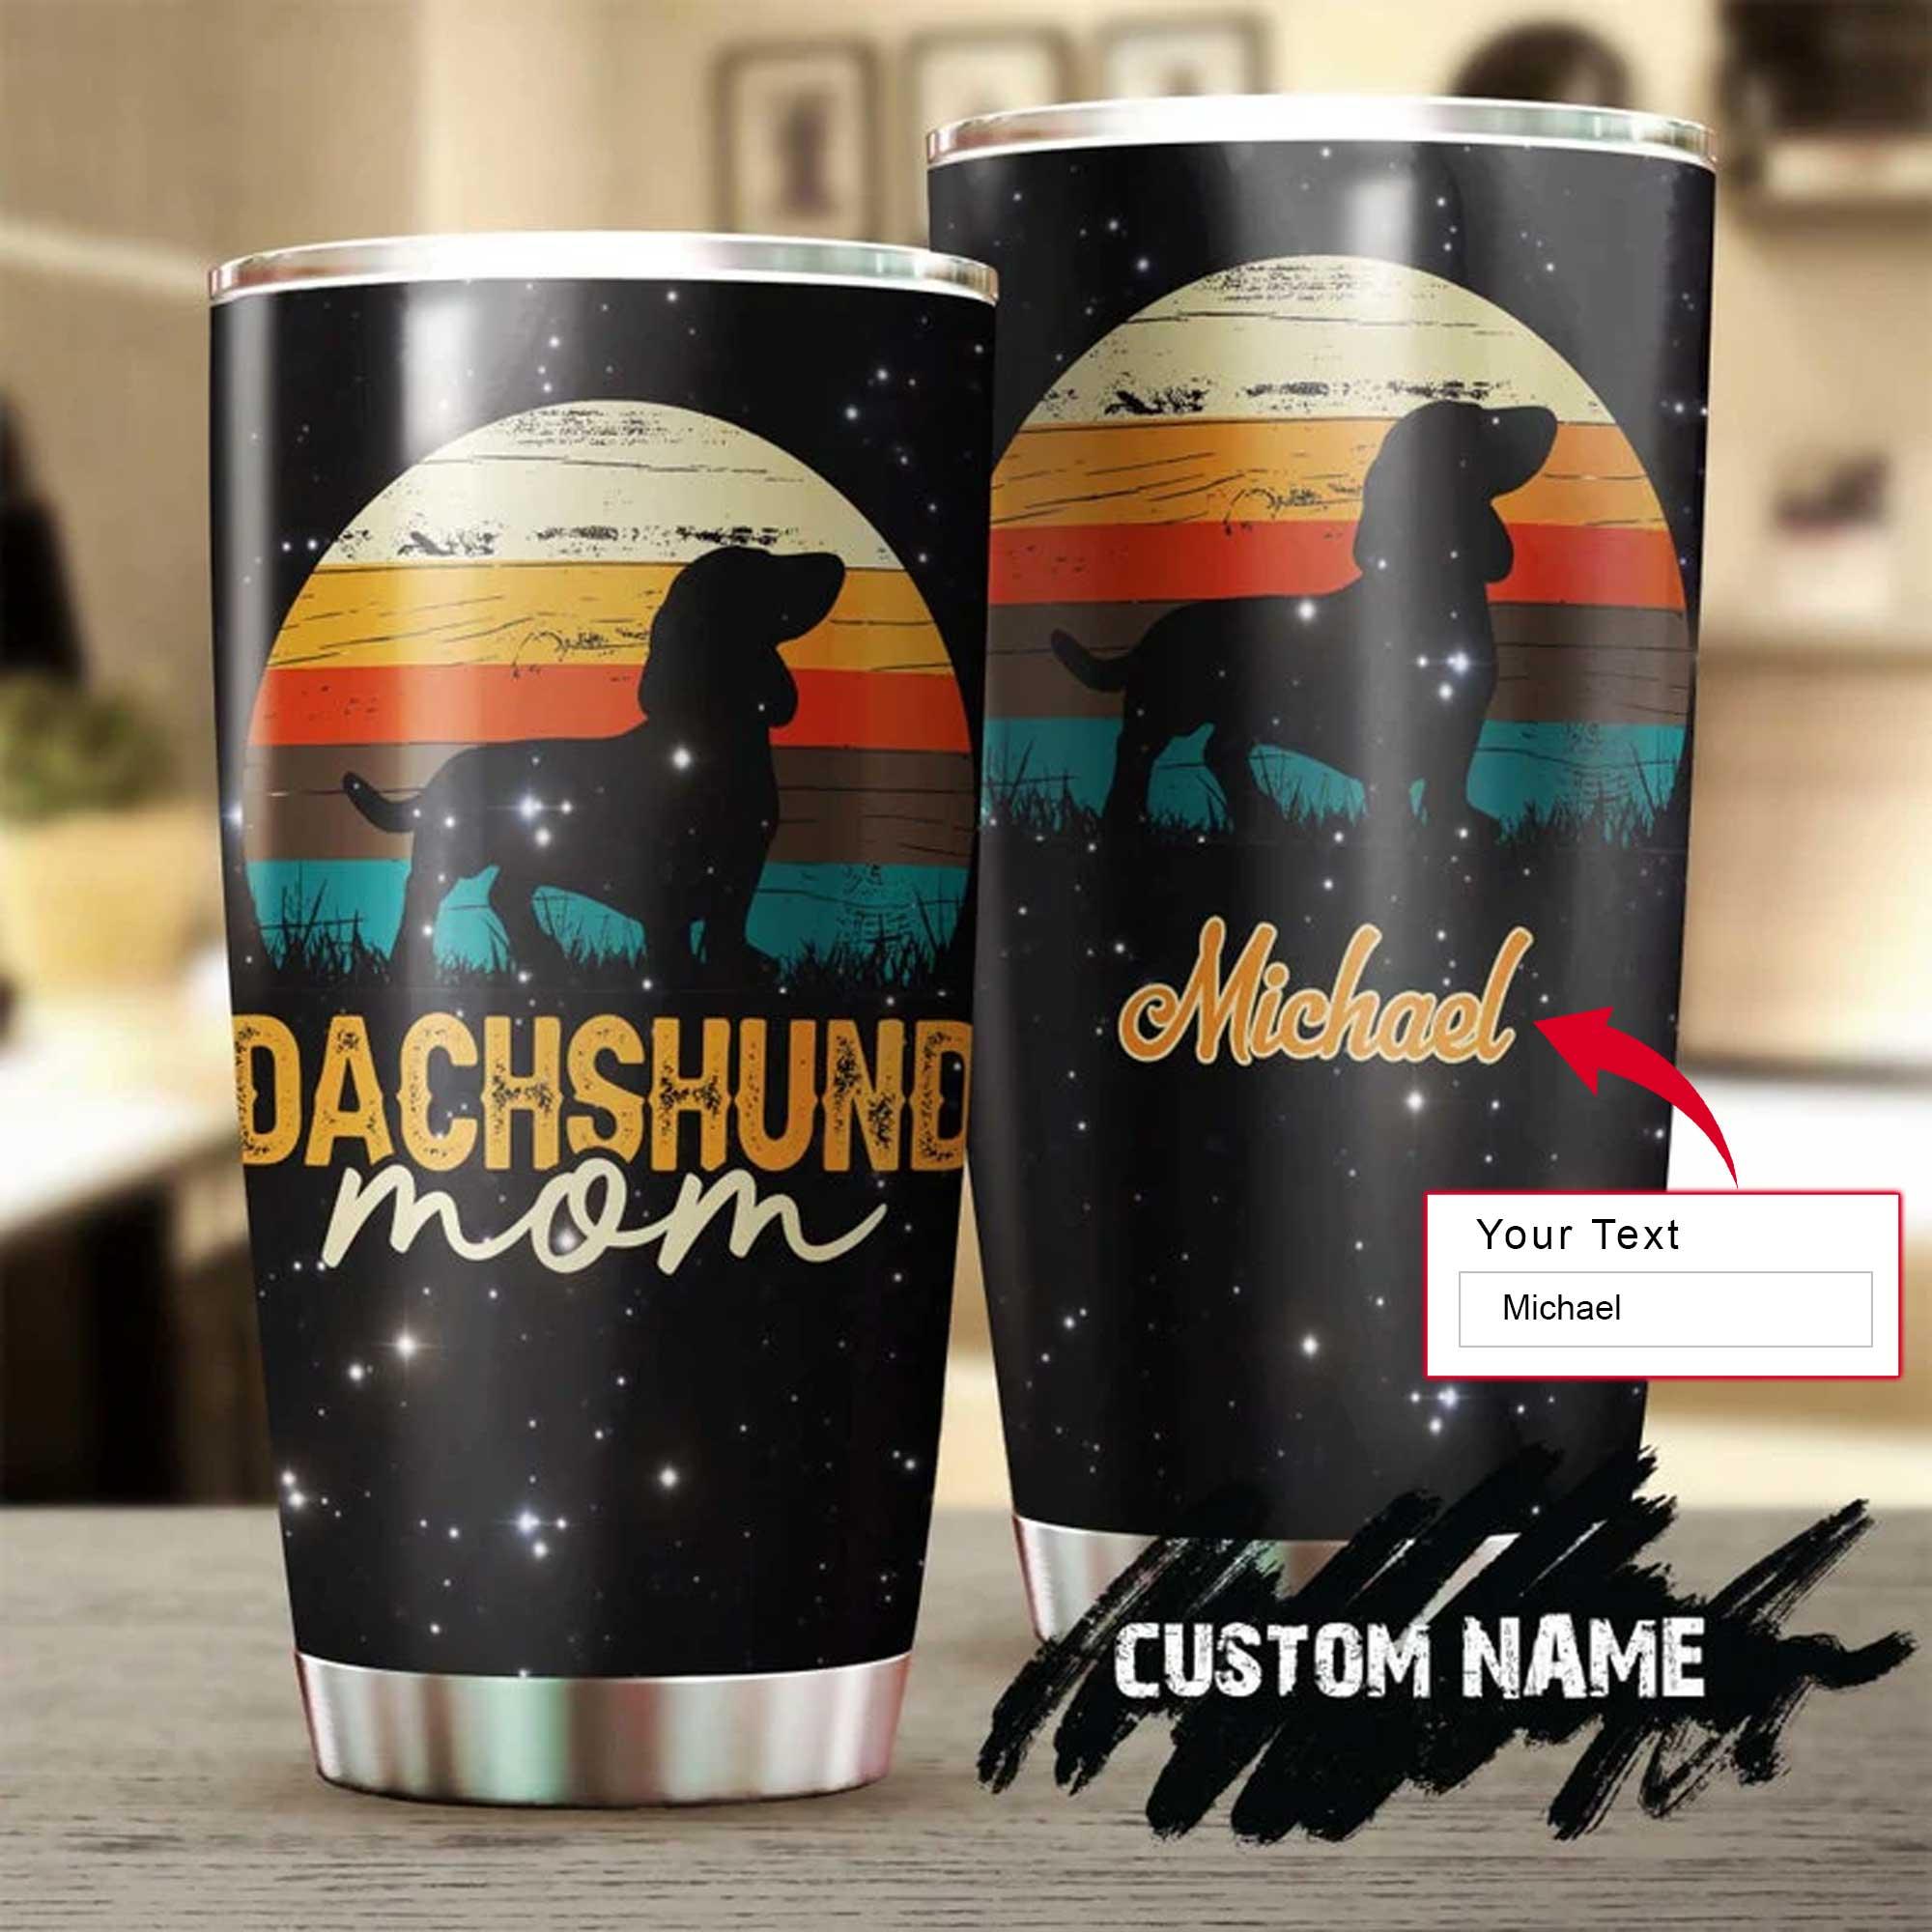 Dachshund Personalized Mother's Day Gift Tumbler - Gift For Dog Lover, Dog Mom, Dog Dad, Dog Lady - Dachshund Mom Mother Mommy Tumbler - Amzanimalsgift